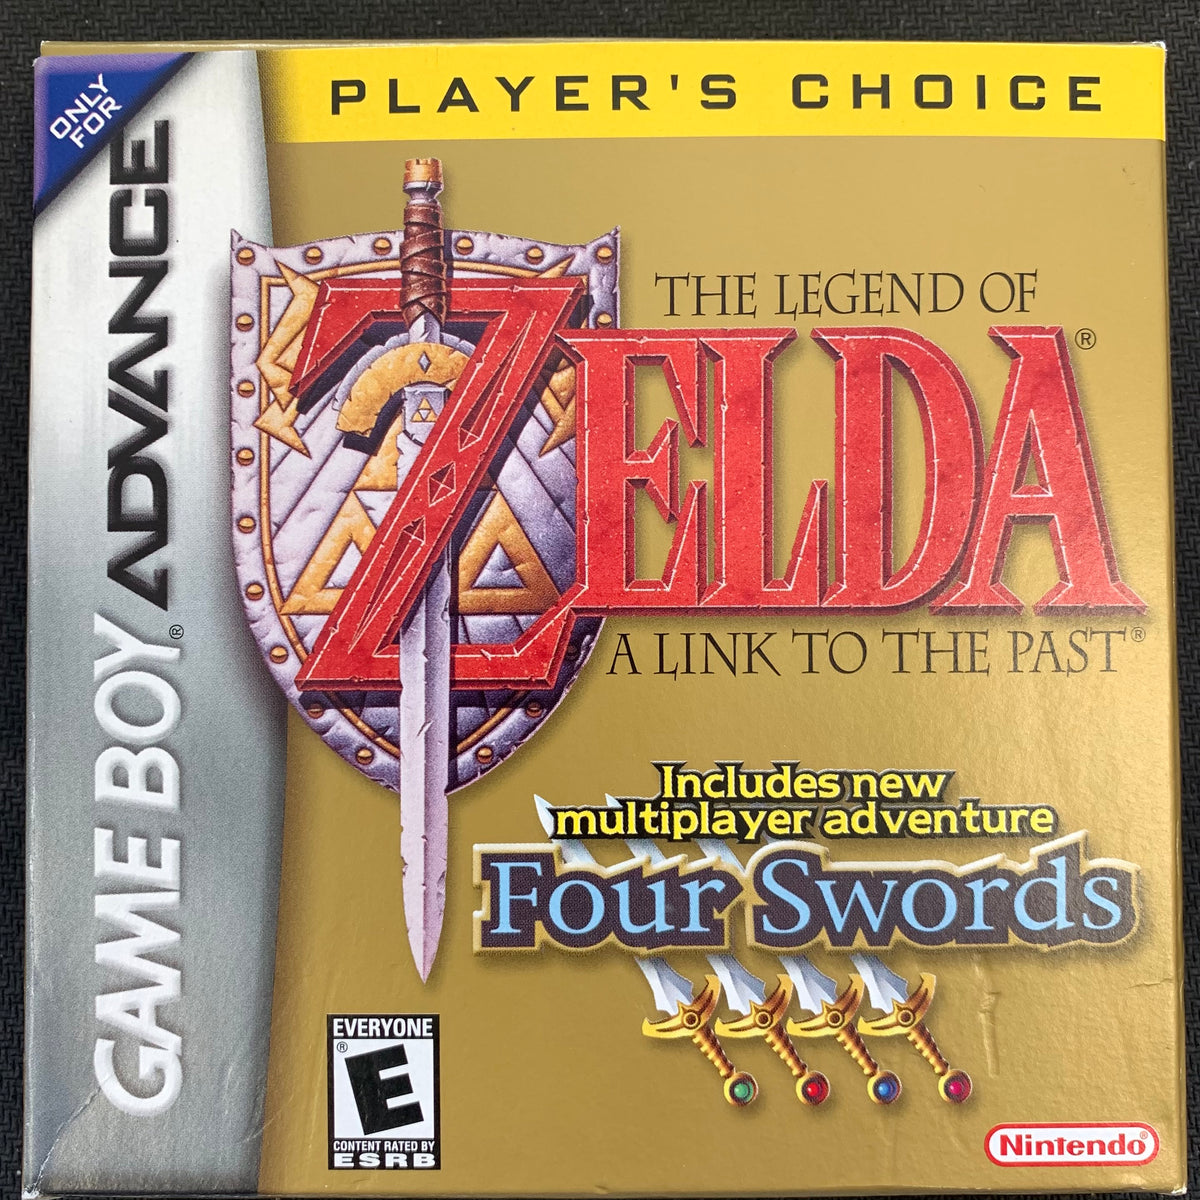 The Legend of Zelda Link To The Past Four Swords NOT FOR RESALE Gameboy  Advance